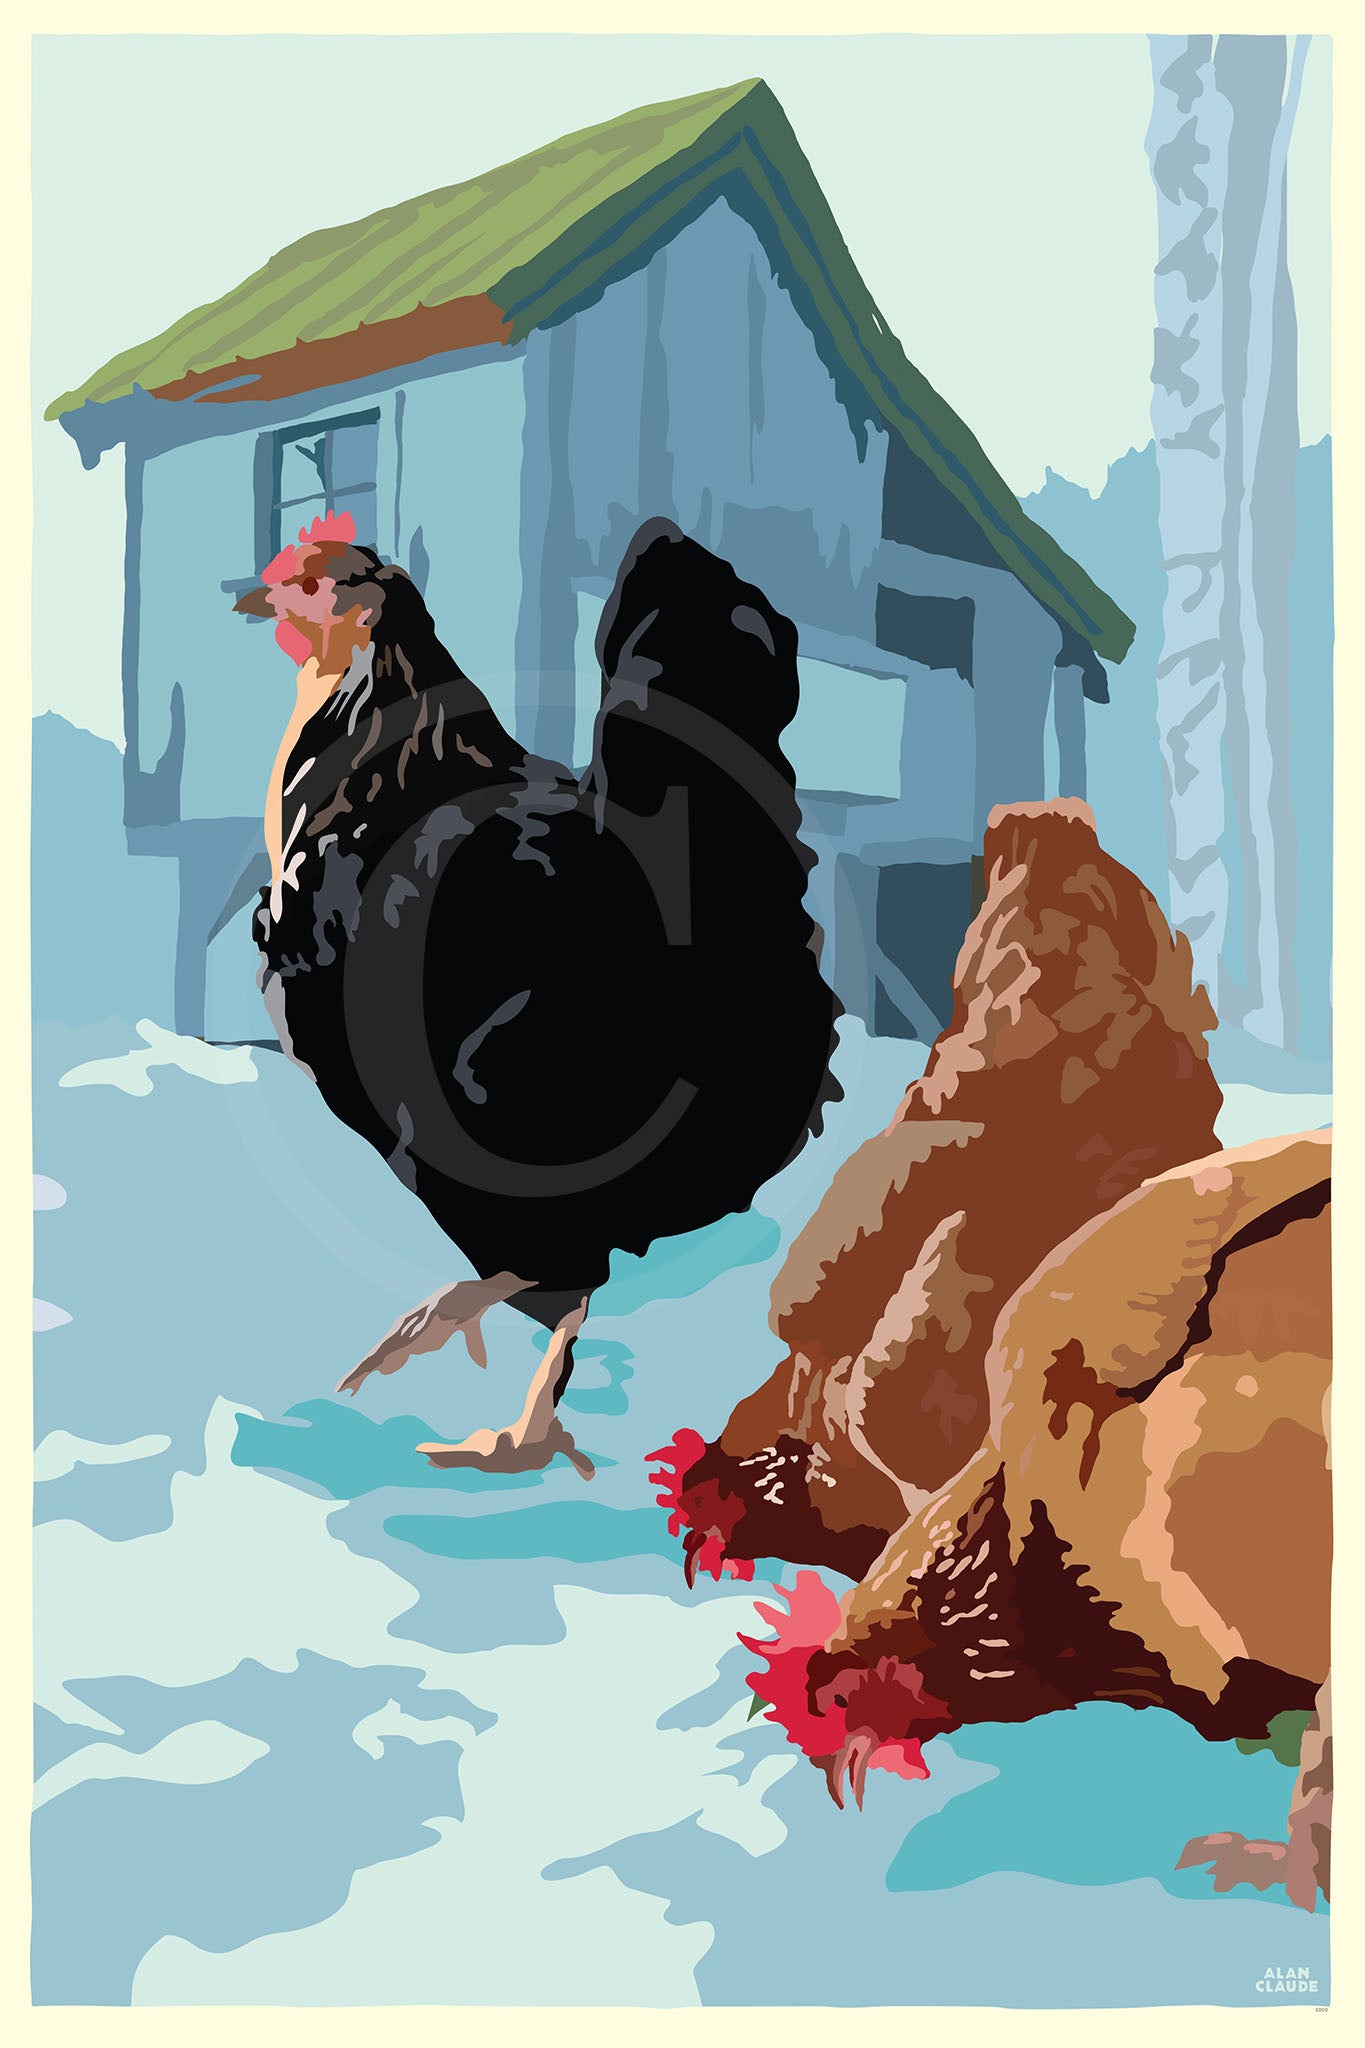 Winter Chickens Art Print 36" x 53" Wall Poster By Alan Claude By Alan Claude - Maine